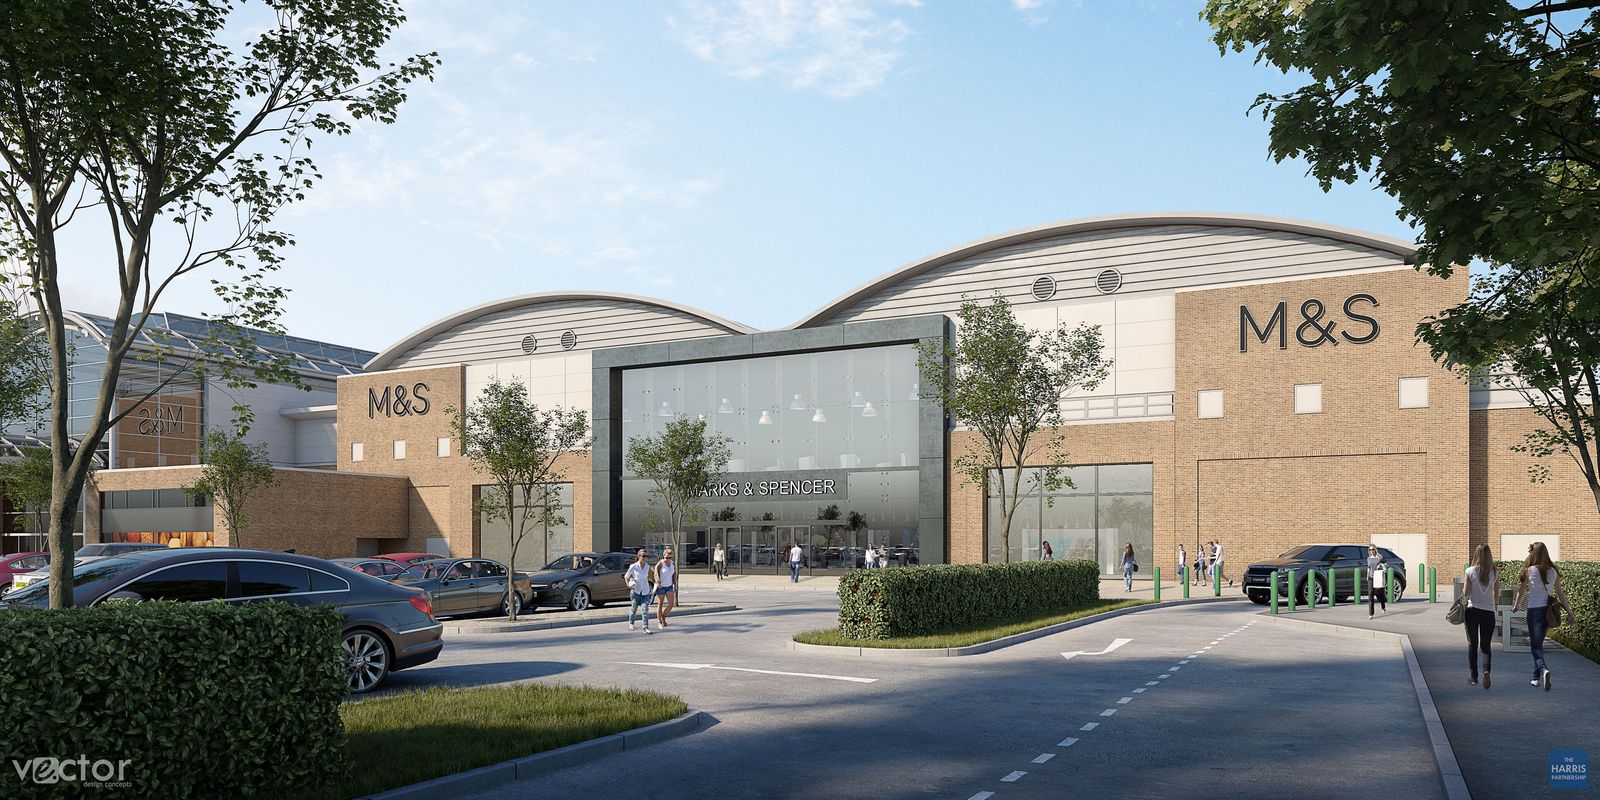 White Rose’s M&S store relocates to larger premises